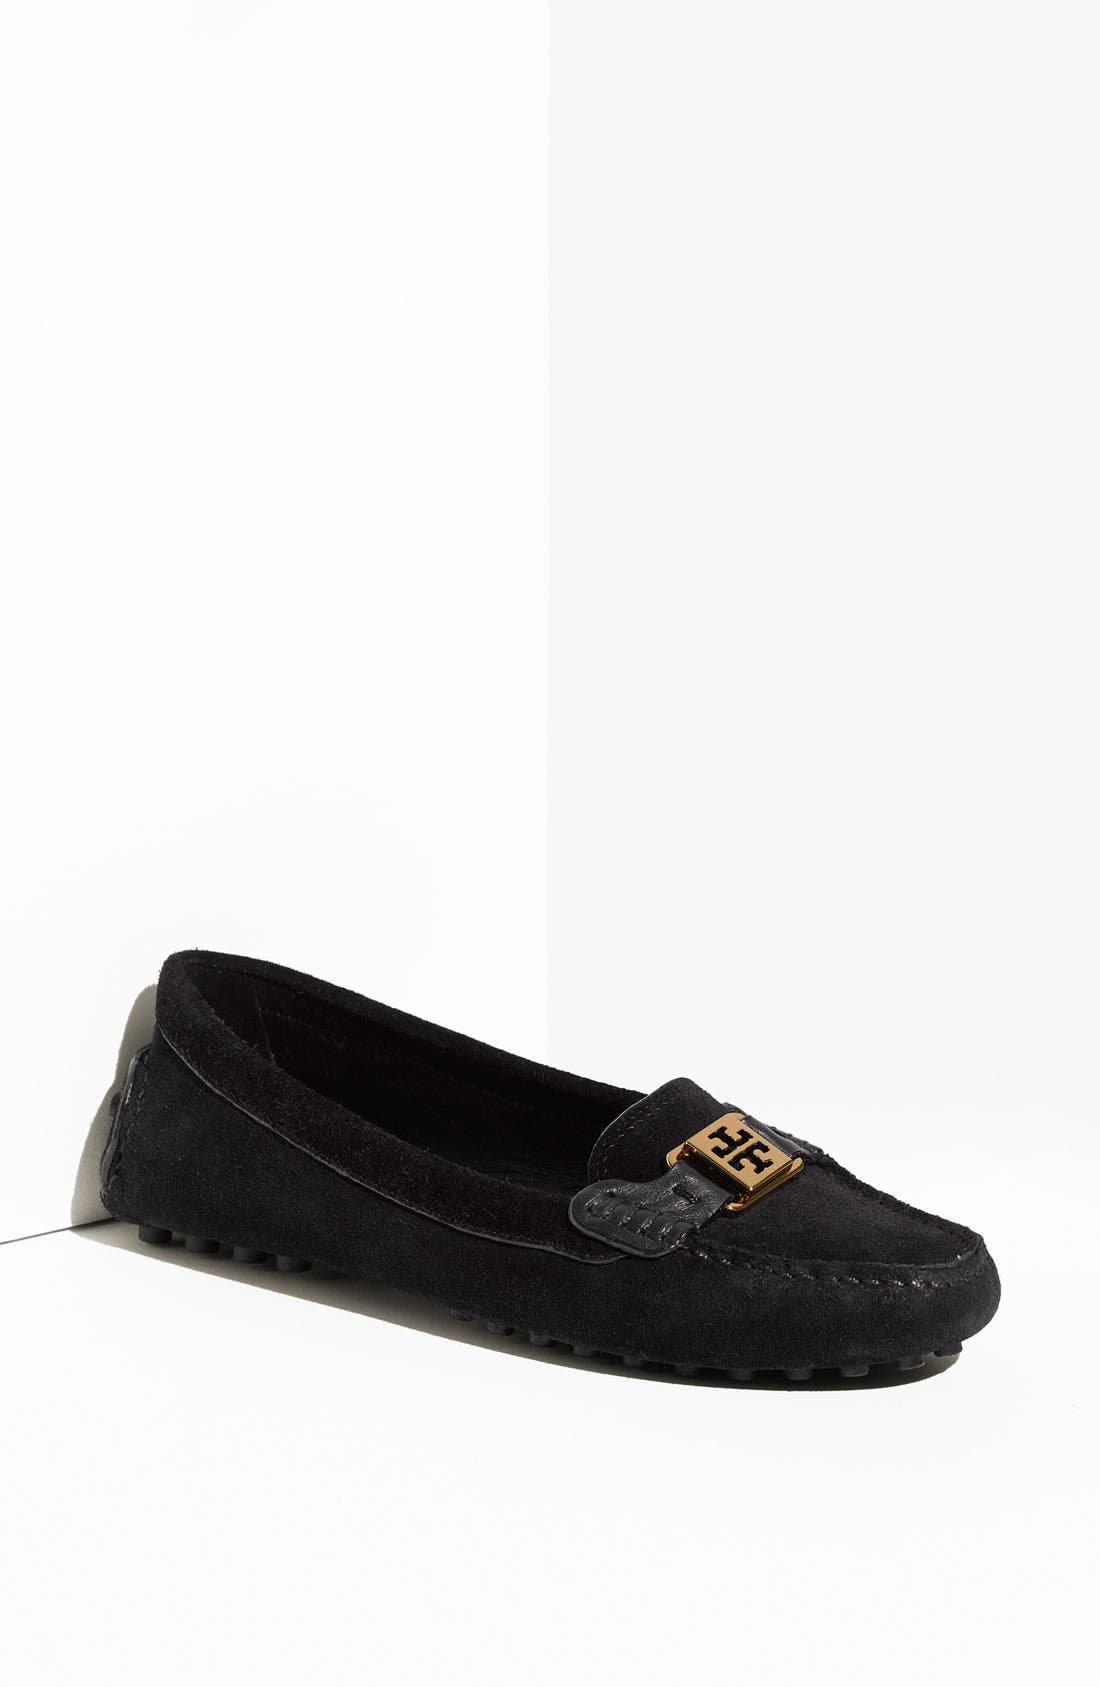 Tory Burch 'Kendrick' Driving Moccasin 